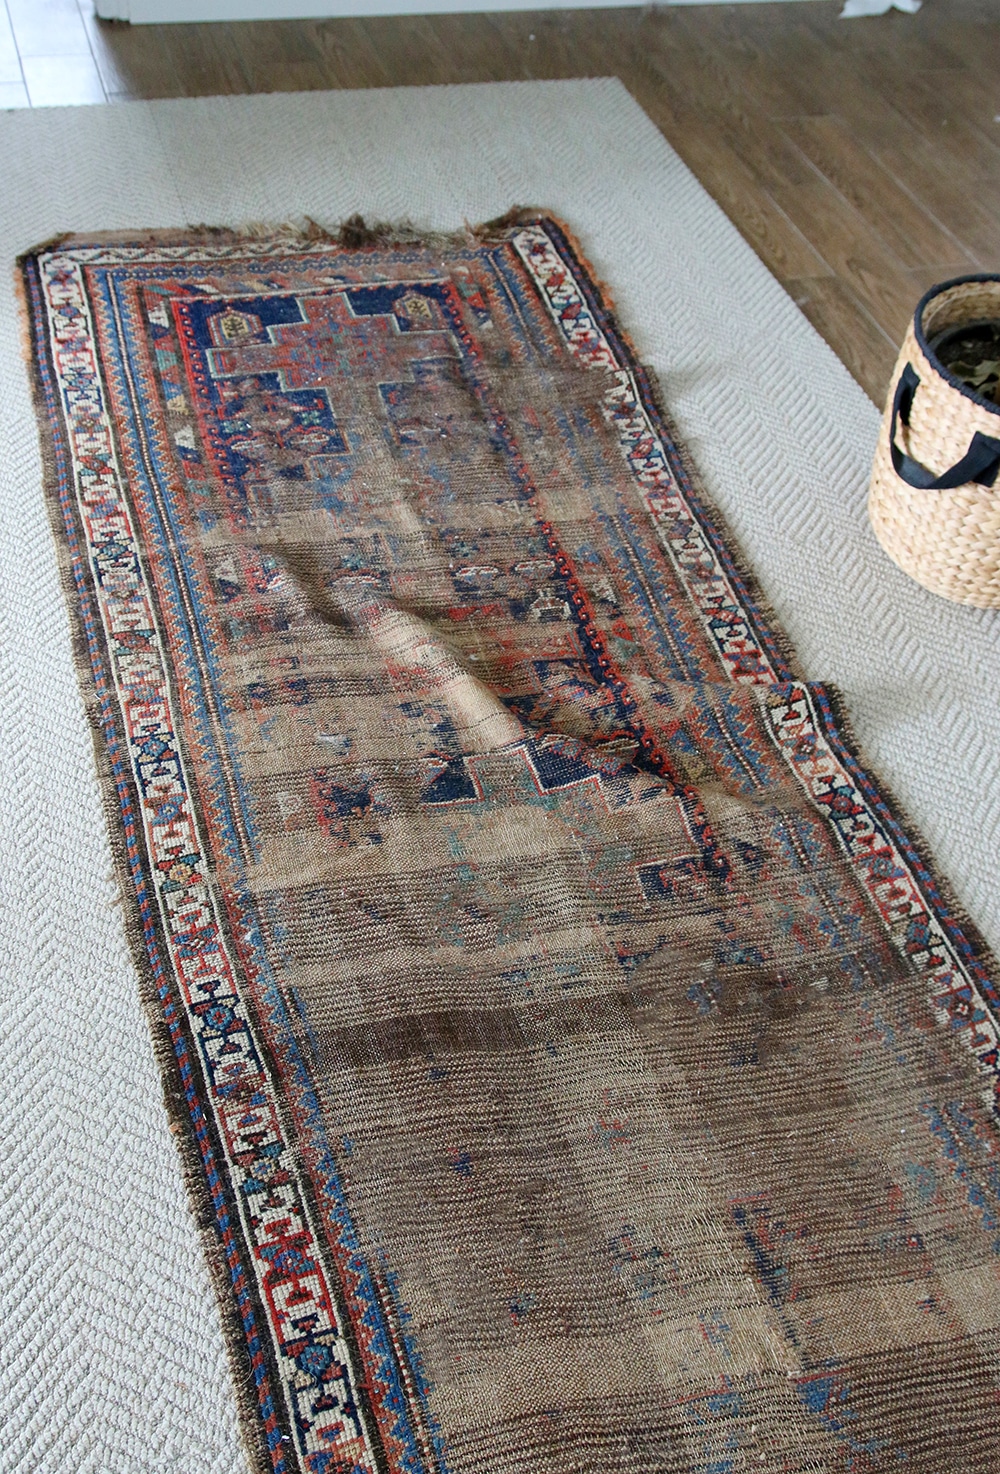 5 Tips For Keeping Area Rugs Exactly, How To Stop Rugs From Moving On Carpet